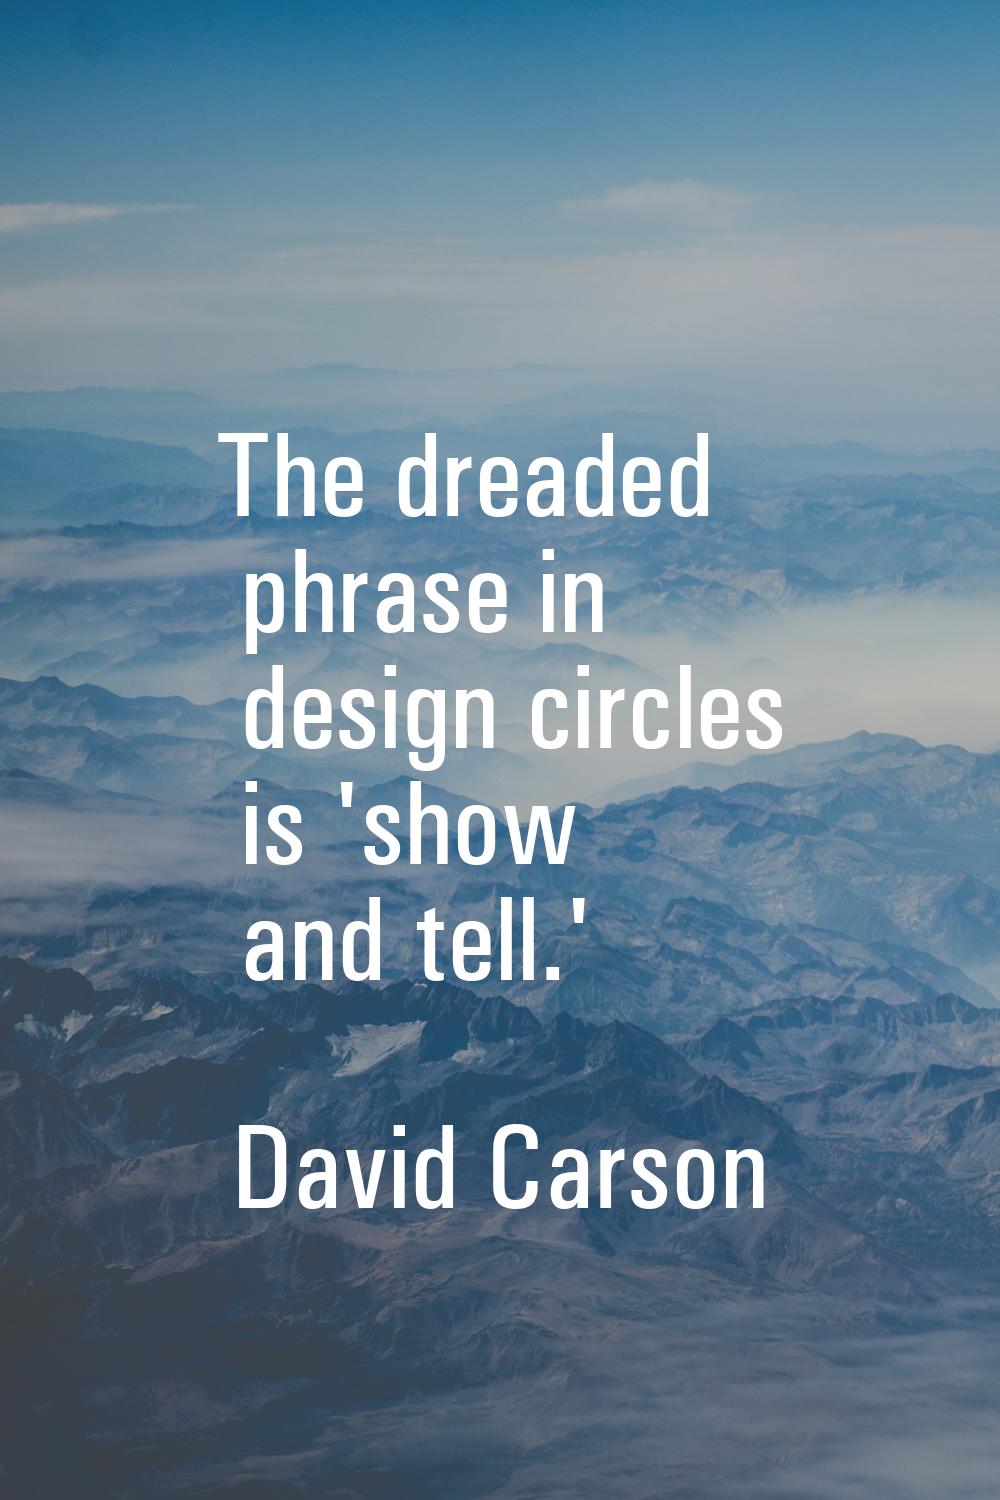 The dreaded phrase in design circles is 'show and tell.'